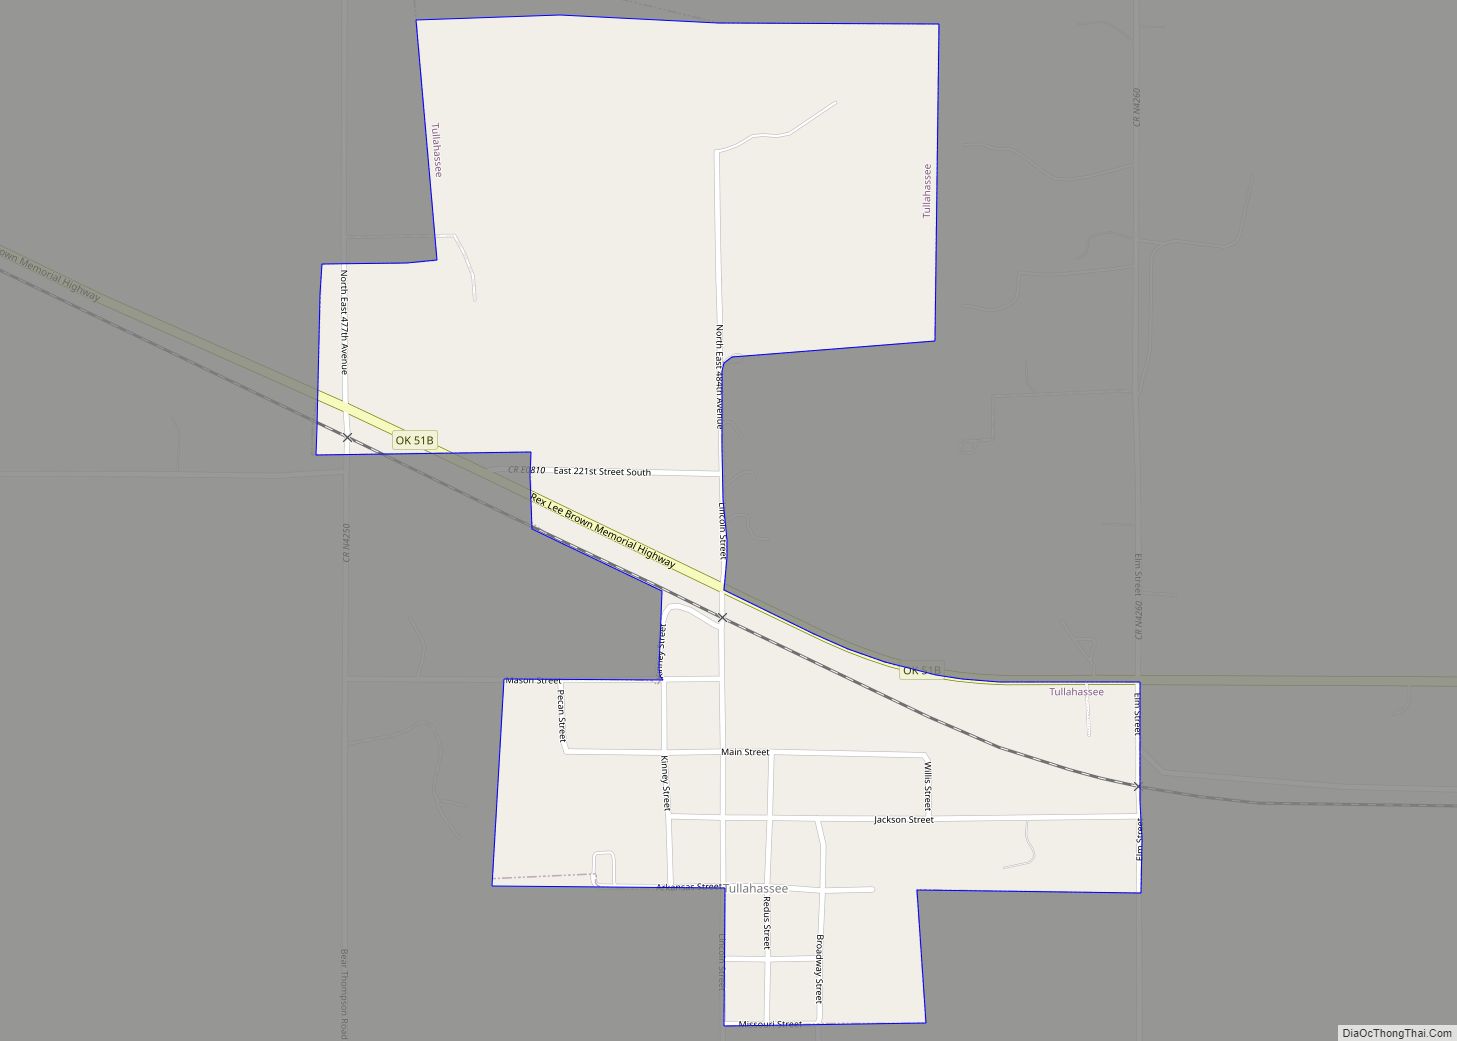 Map of Tullahassee town